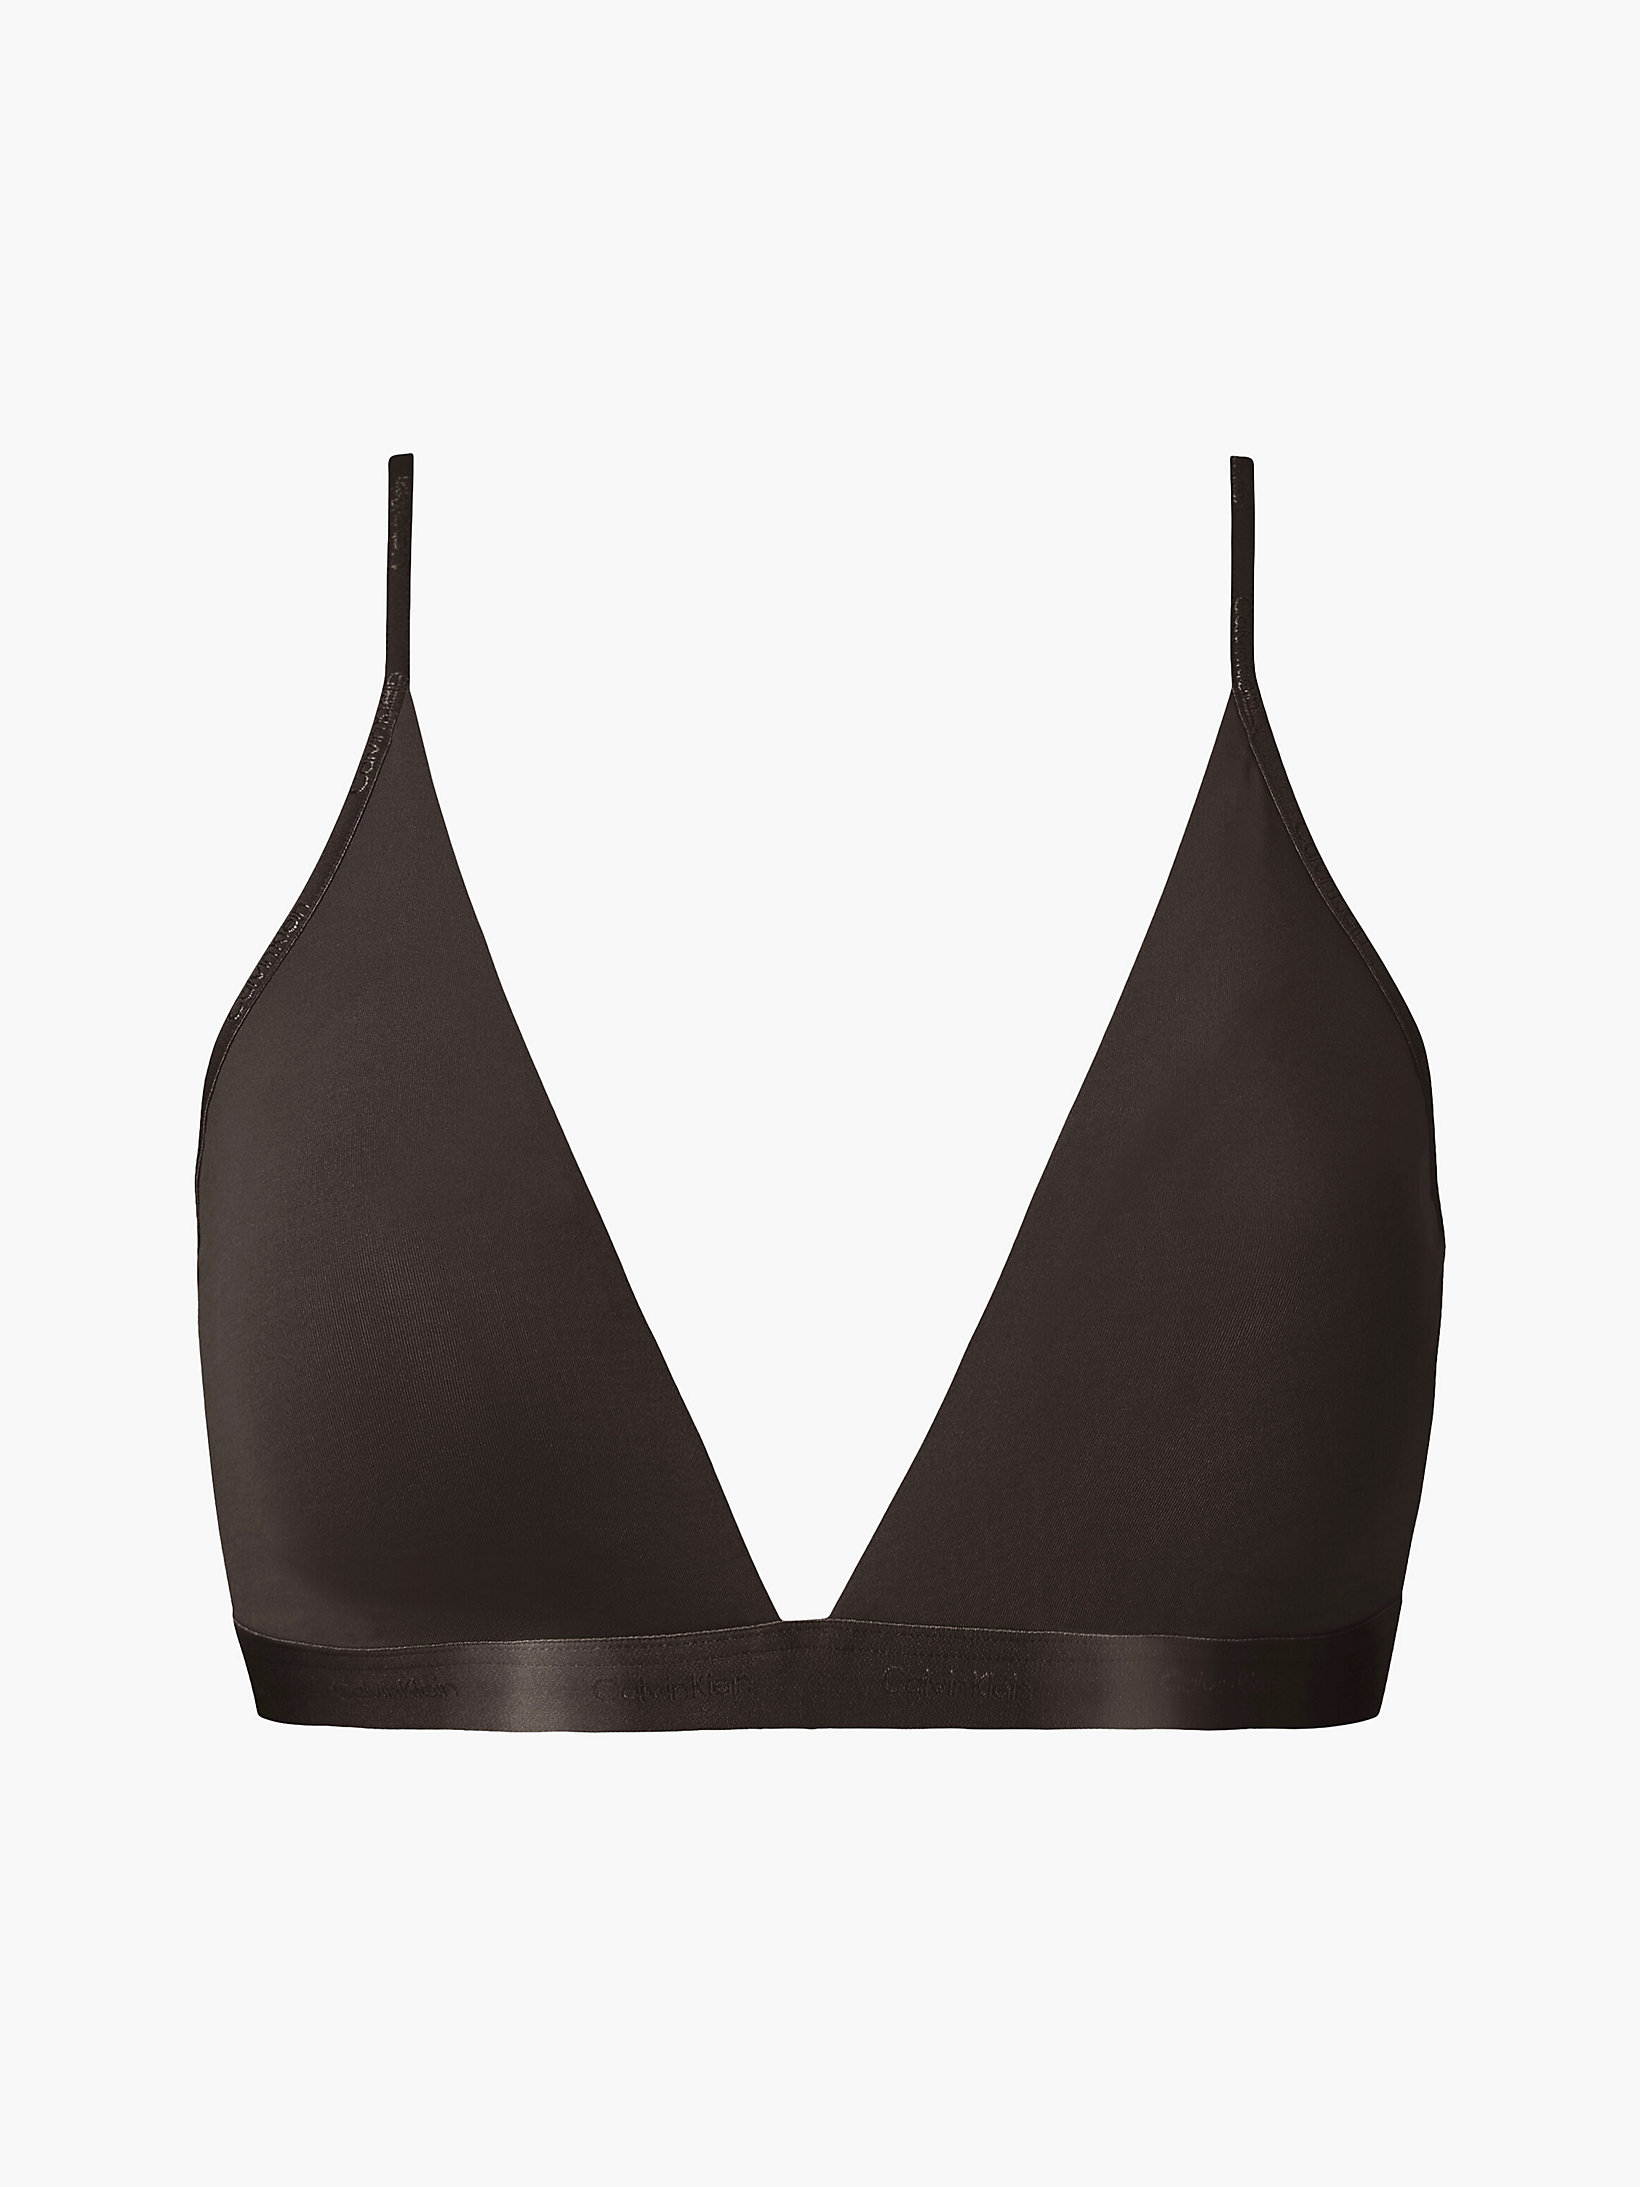 Soutien-Gorge Triangle - Form To Body > Woodland > undefined femmes > Calvin Klein